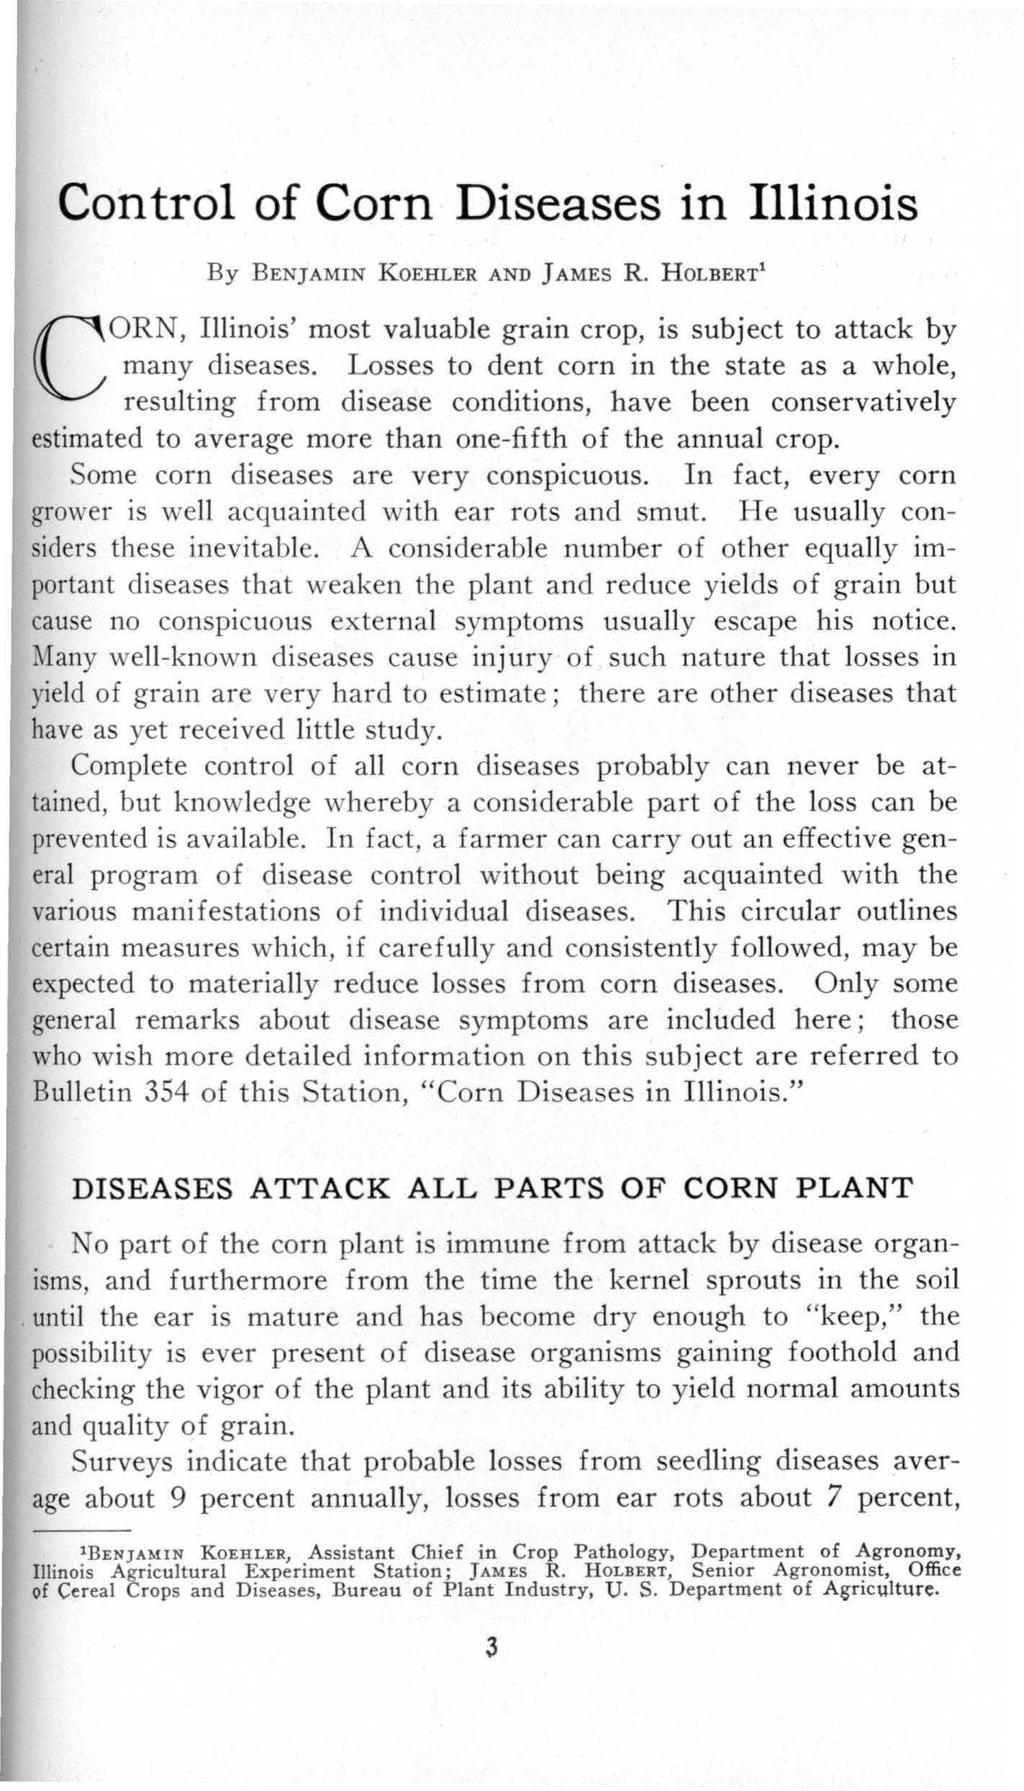 Control of Corn Diseases in Illinois By BENJAMIN KoEHLER AND ]AMES R. HoLBERT 1 C ORN, Illinois' most valuable grain crop, is subject to attack by many diseases.